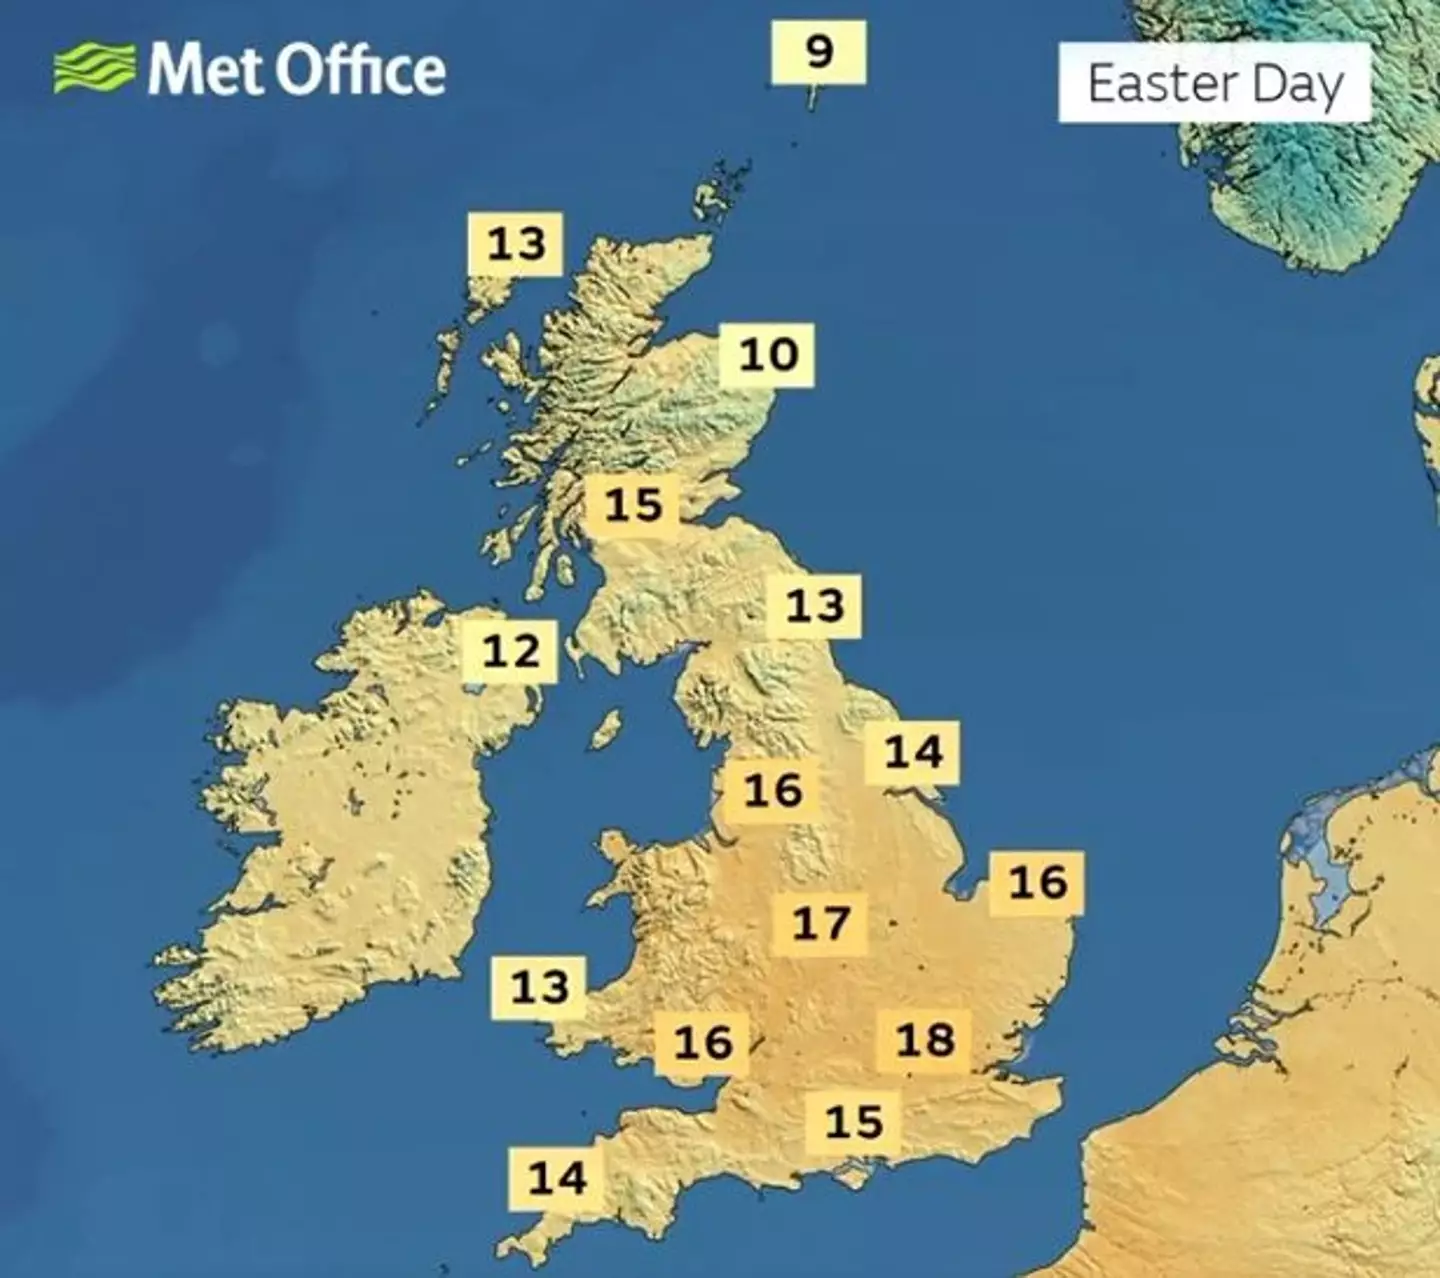 Happy Easter everyone as our sunny Sunday might just turn out to be the hottest day of the year so far.